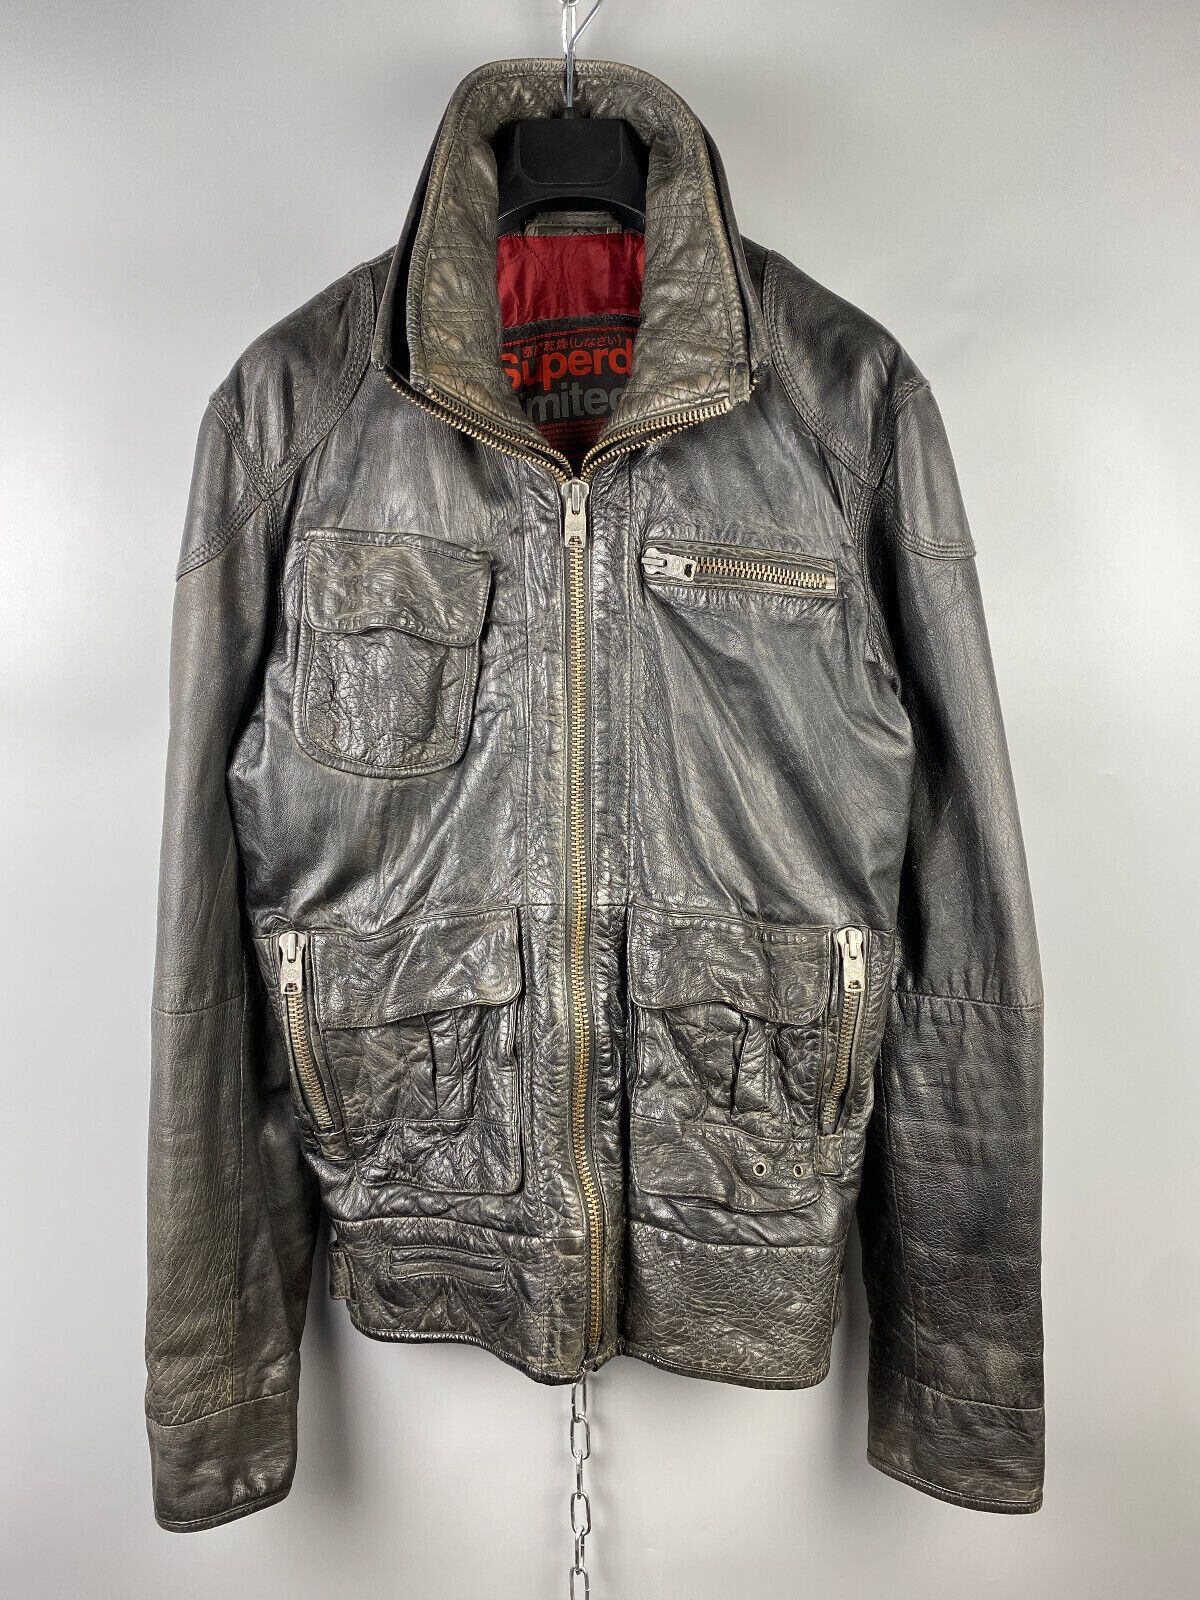 Pre-owned Leather Jacket X Superdry Super Dry Limited Leather Biker Motorcycle Jacket In Grey